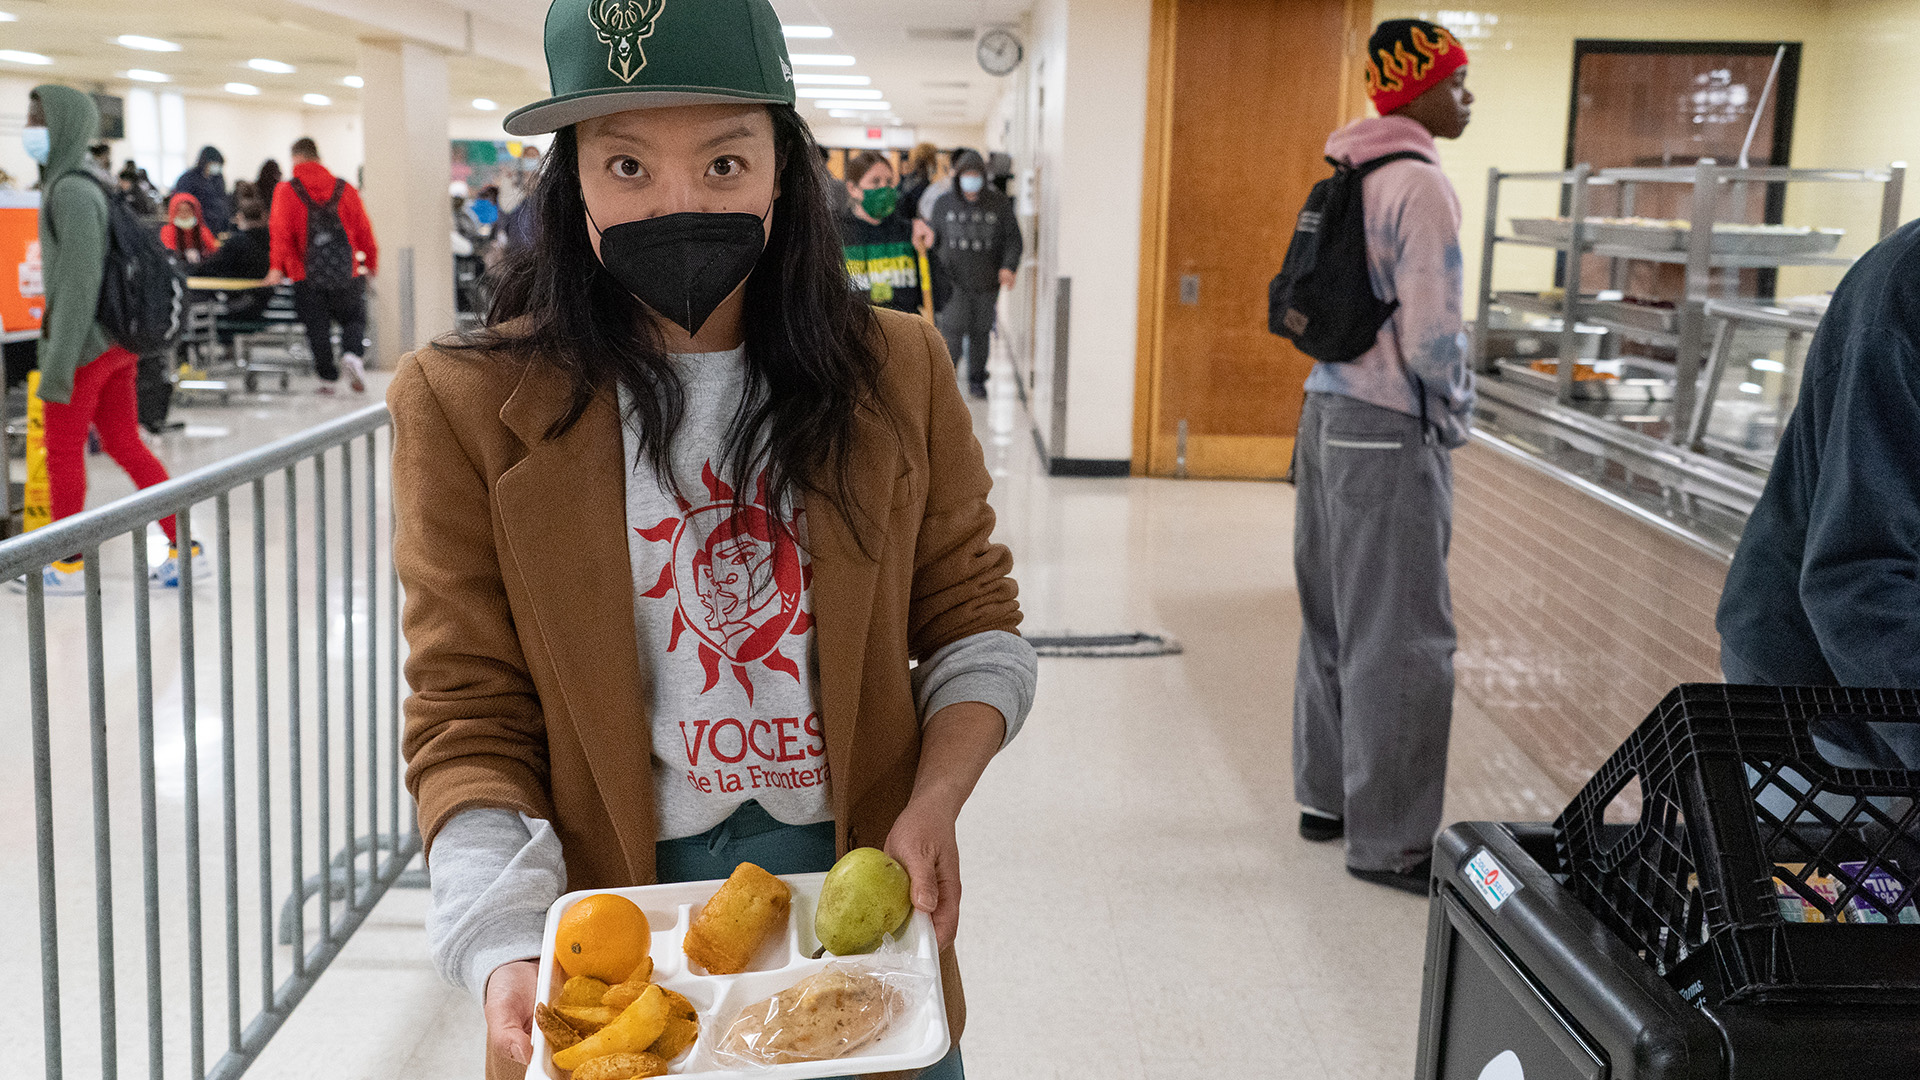 Francesca Hong holds a tray with a school lunch while standing next to a food service counter, with students in a school cafeteria standing and walking in the background.